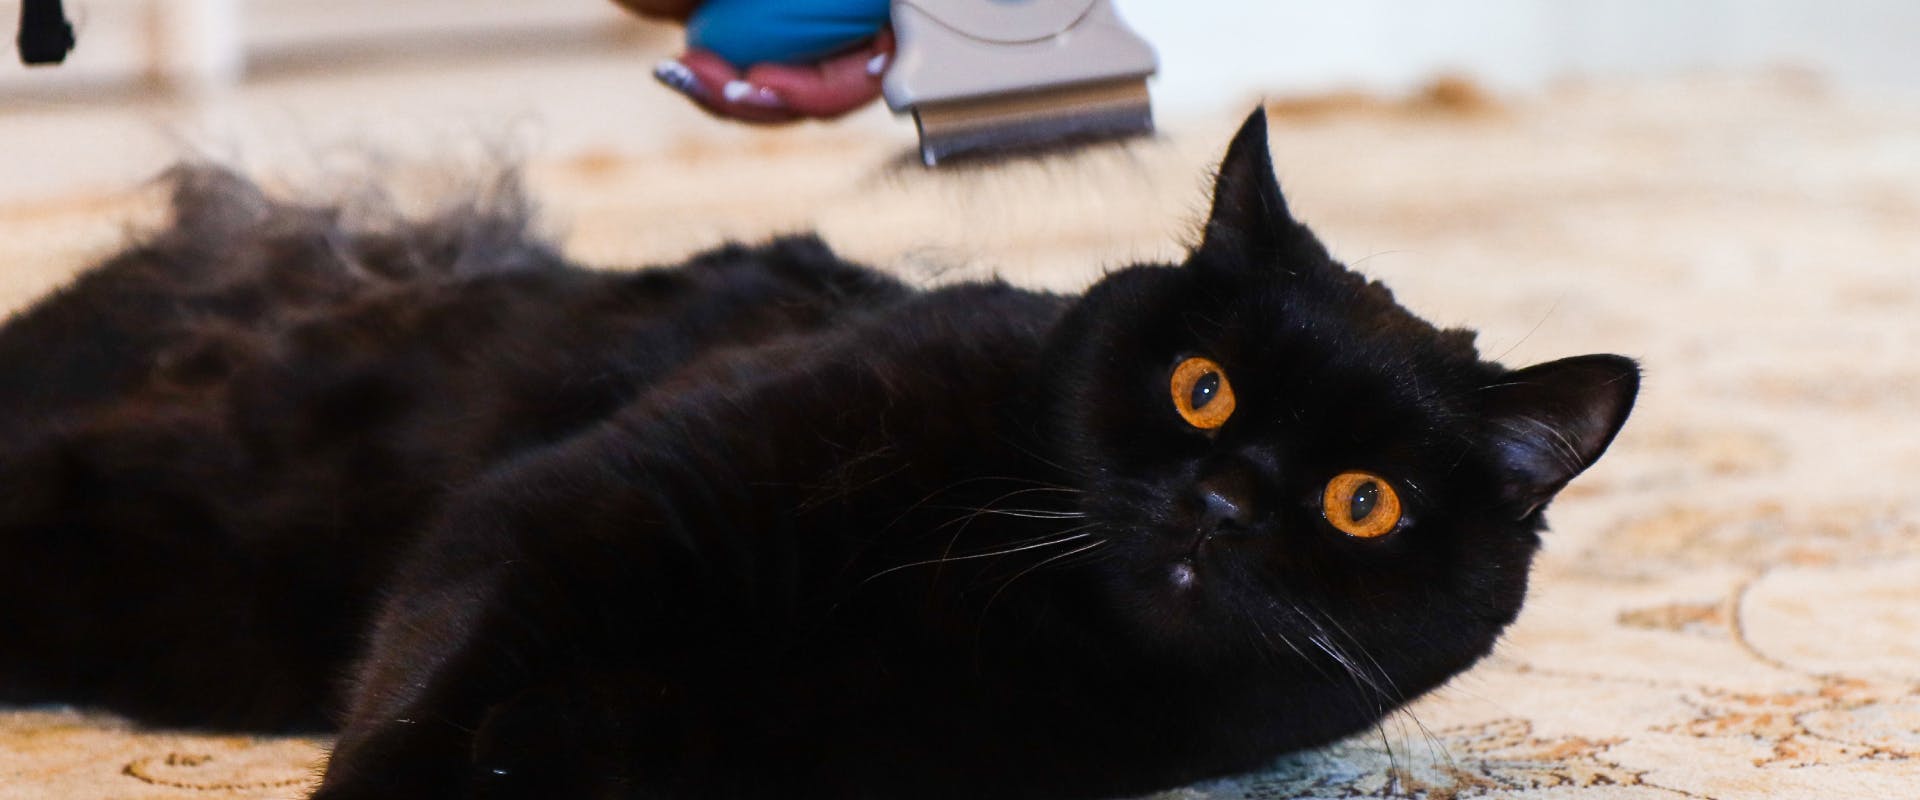 a black short-haired cat with orange eyes lying on a rug whilst being groomed by a cat dandruff de-shedding brush